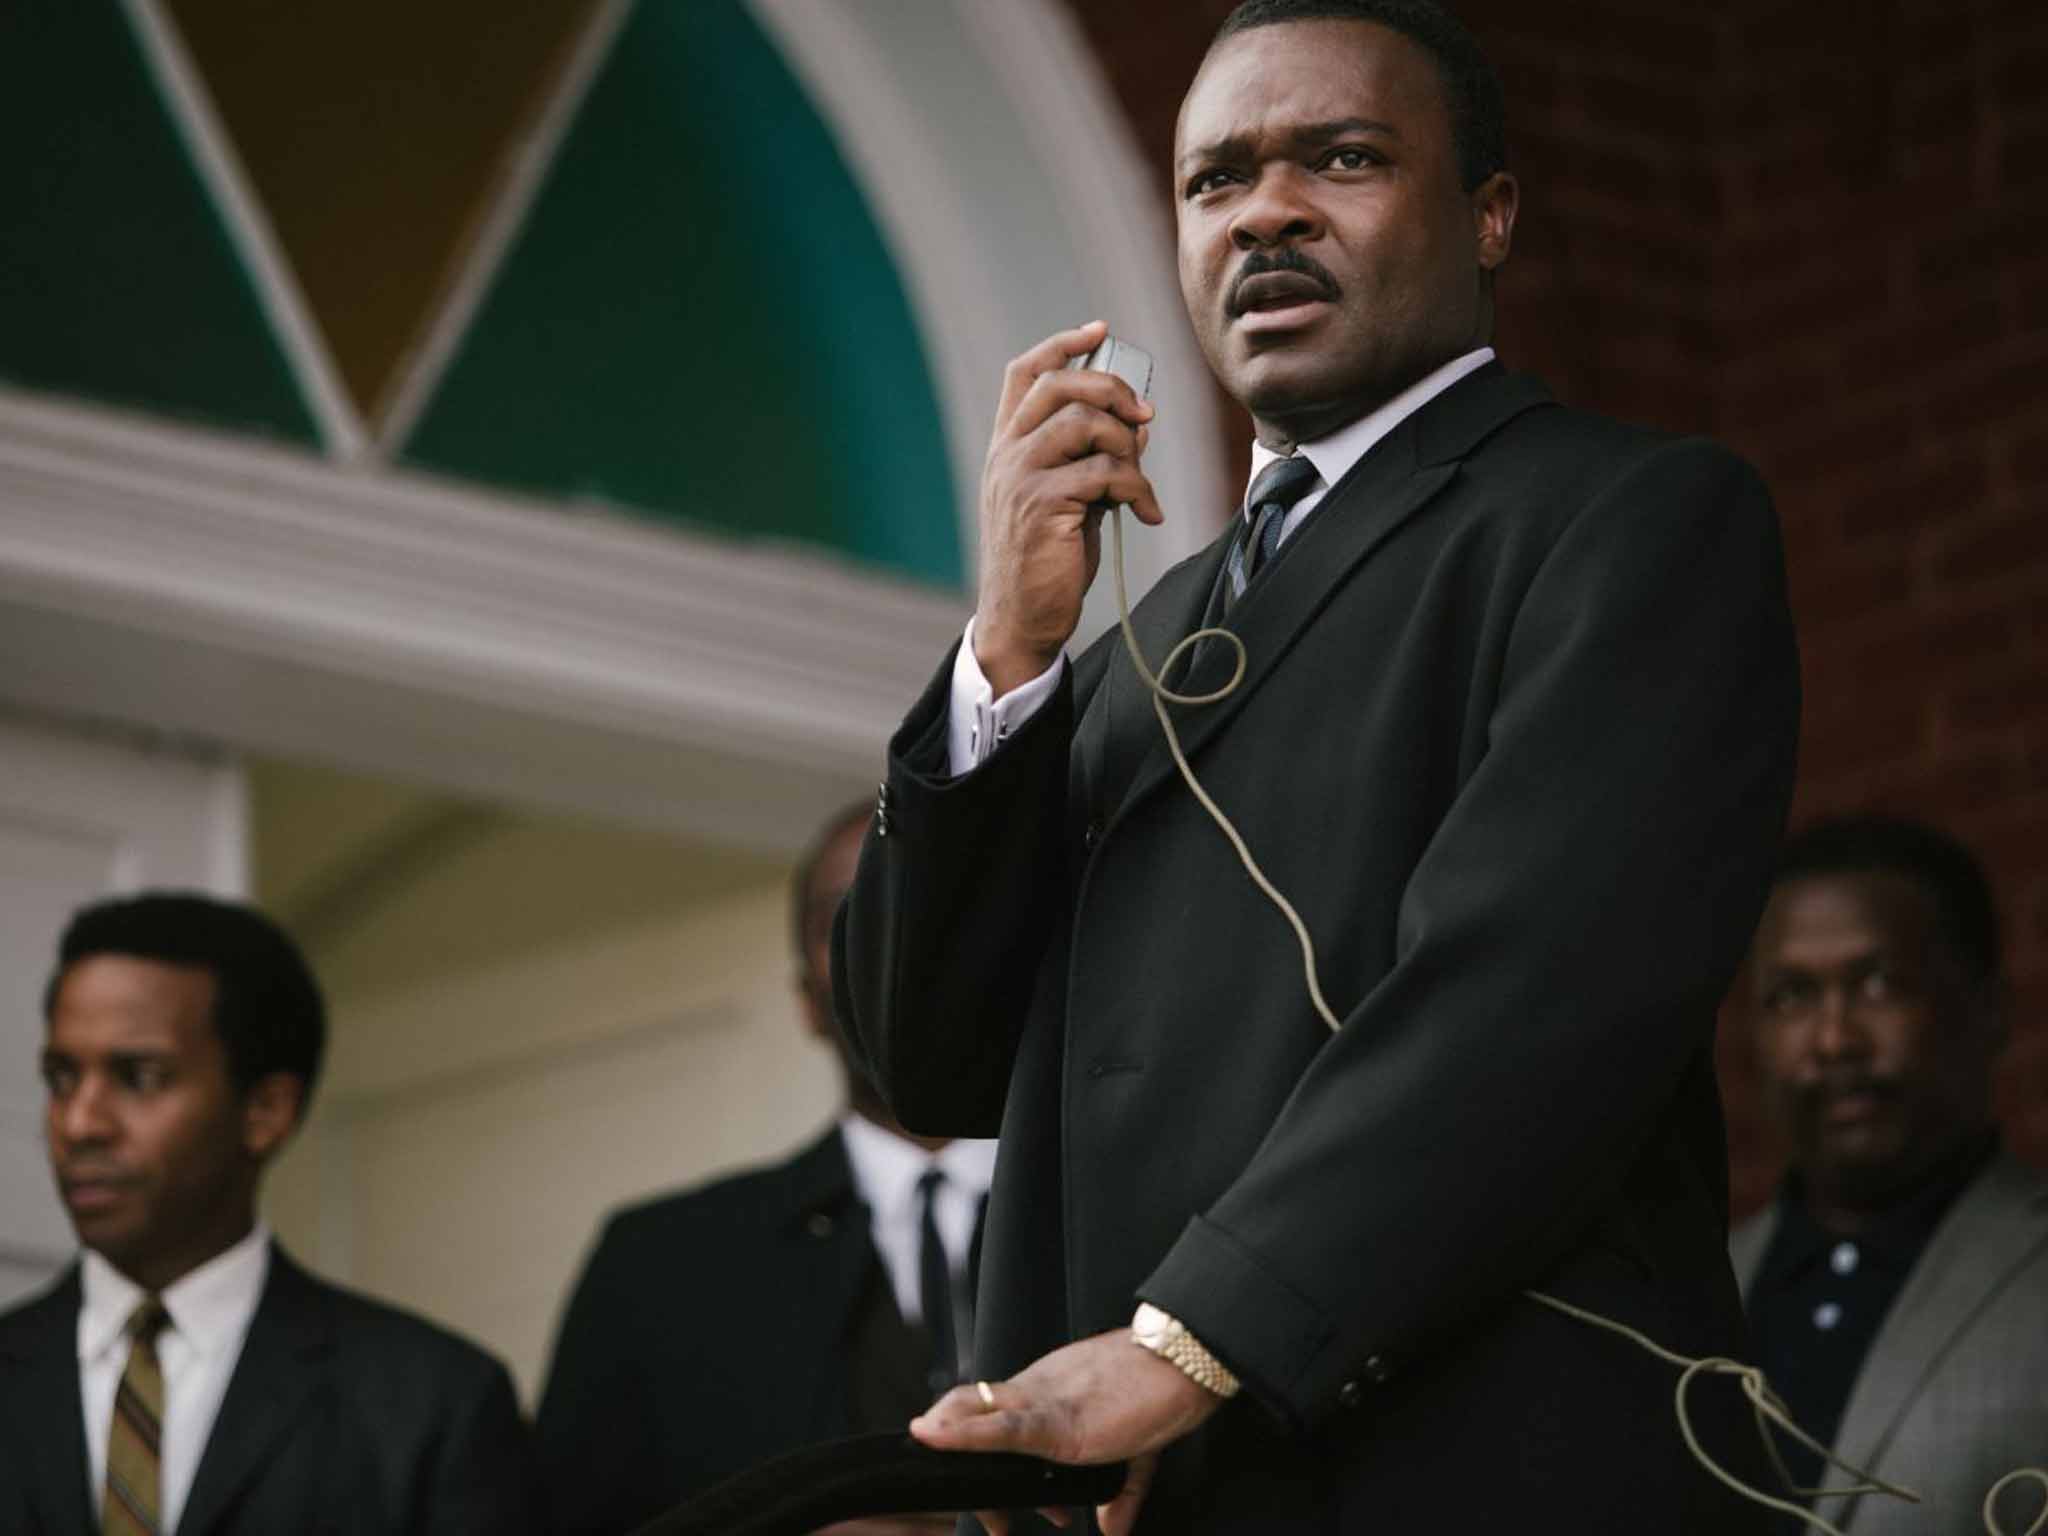 David Oyelowo is among those who have risen above the competition thanks to 'proper' training